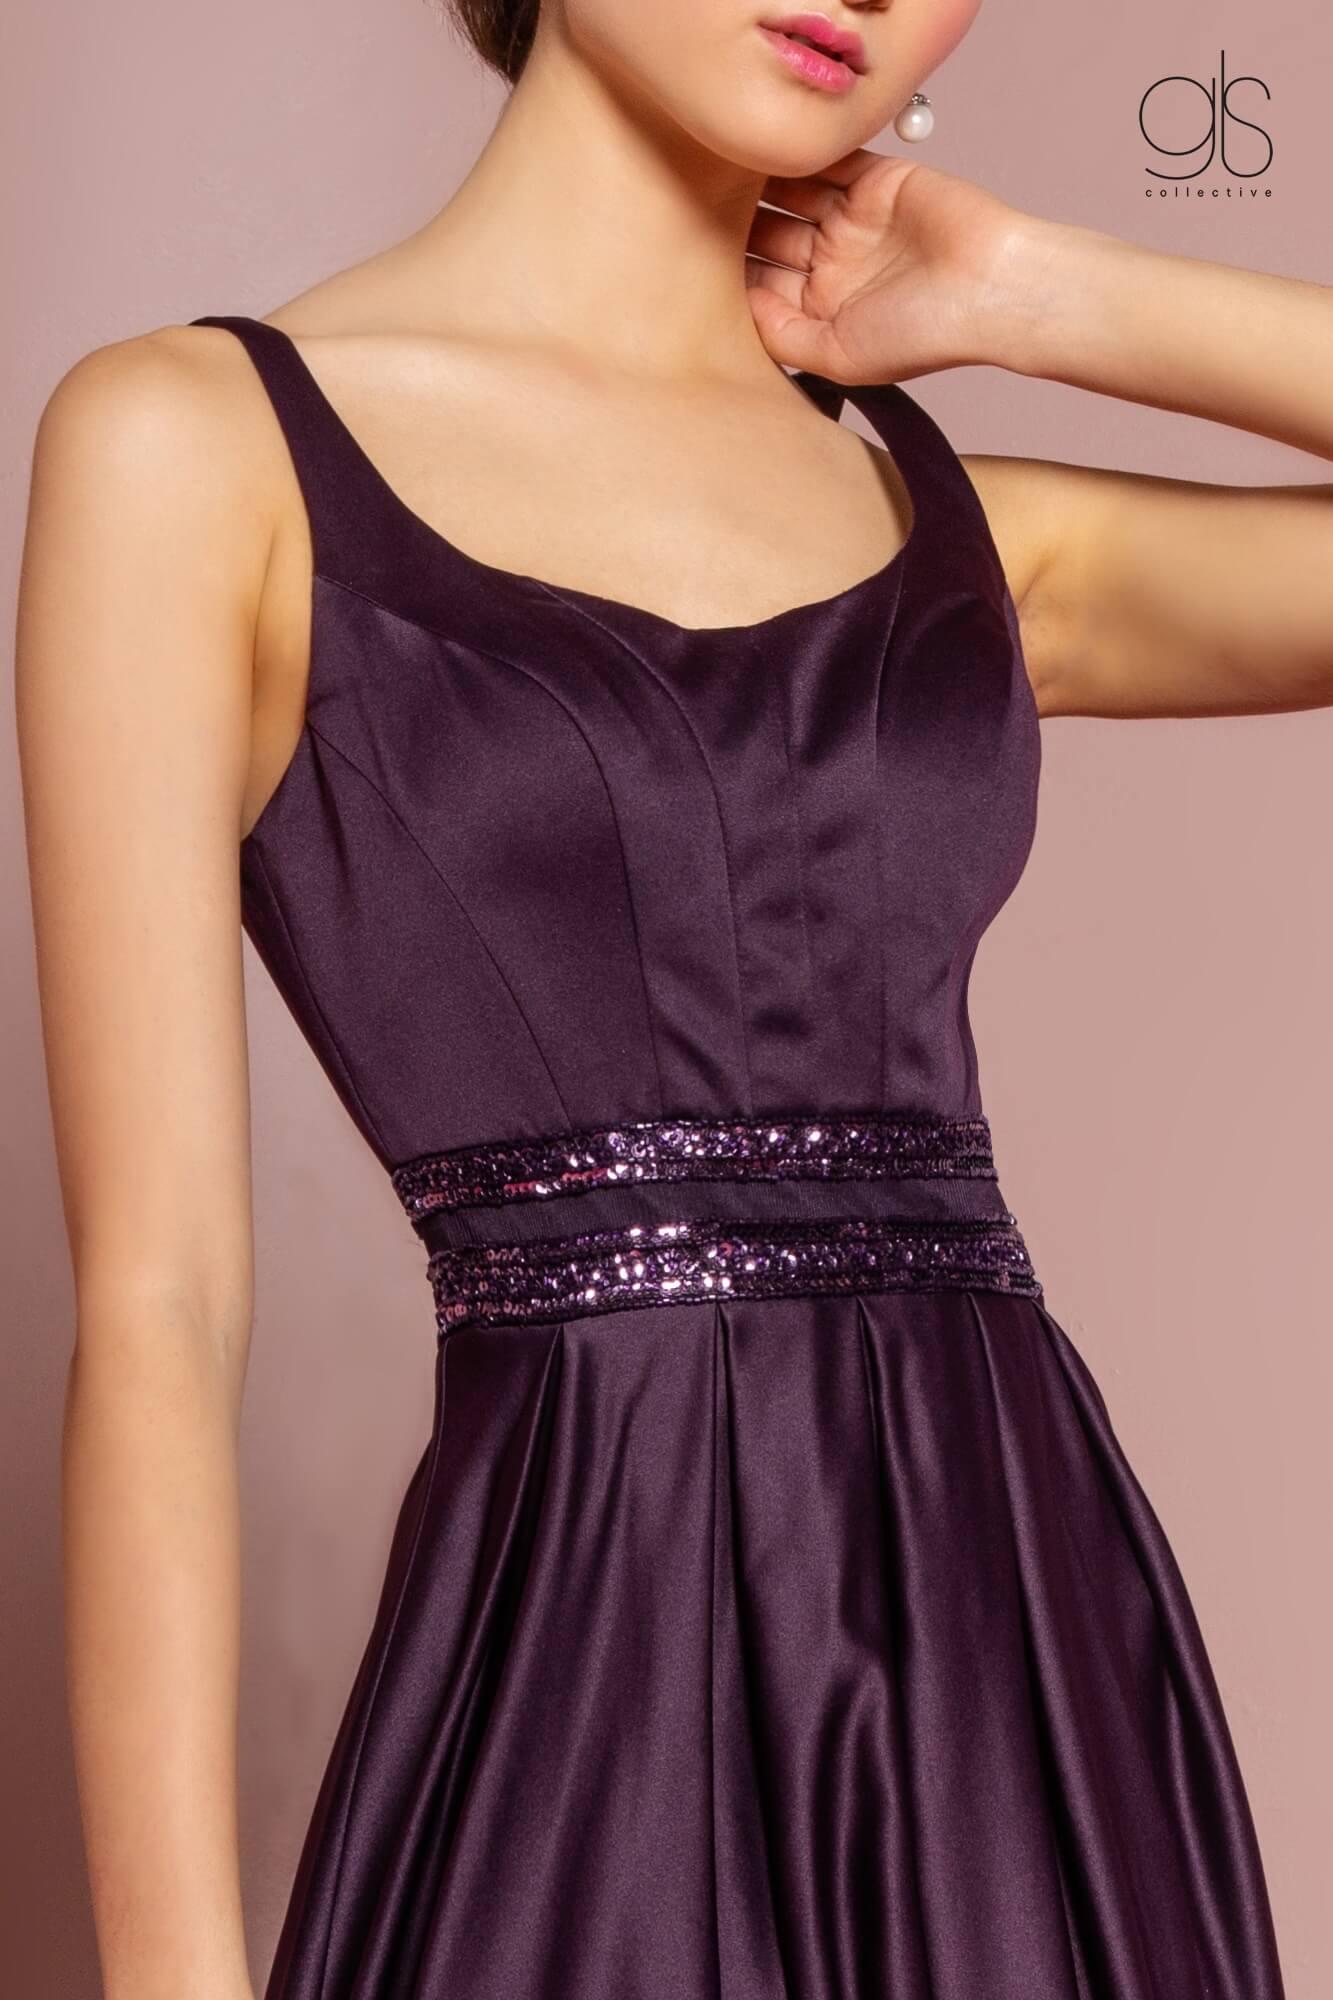 Prom Long Sleeveless Formal Evening Dress Sale - The Dress Outlet